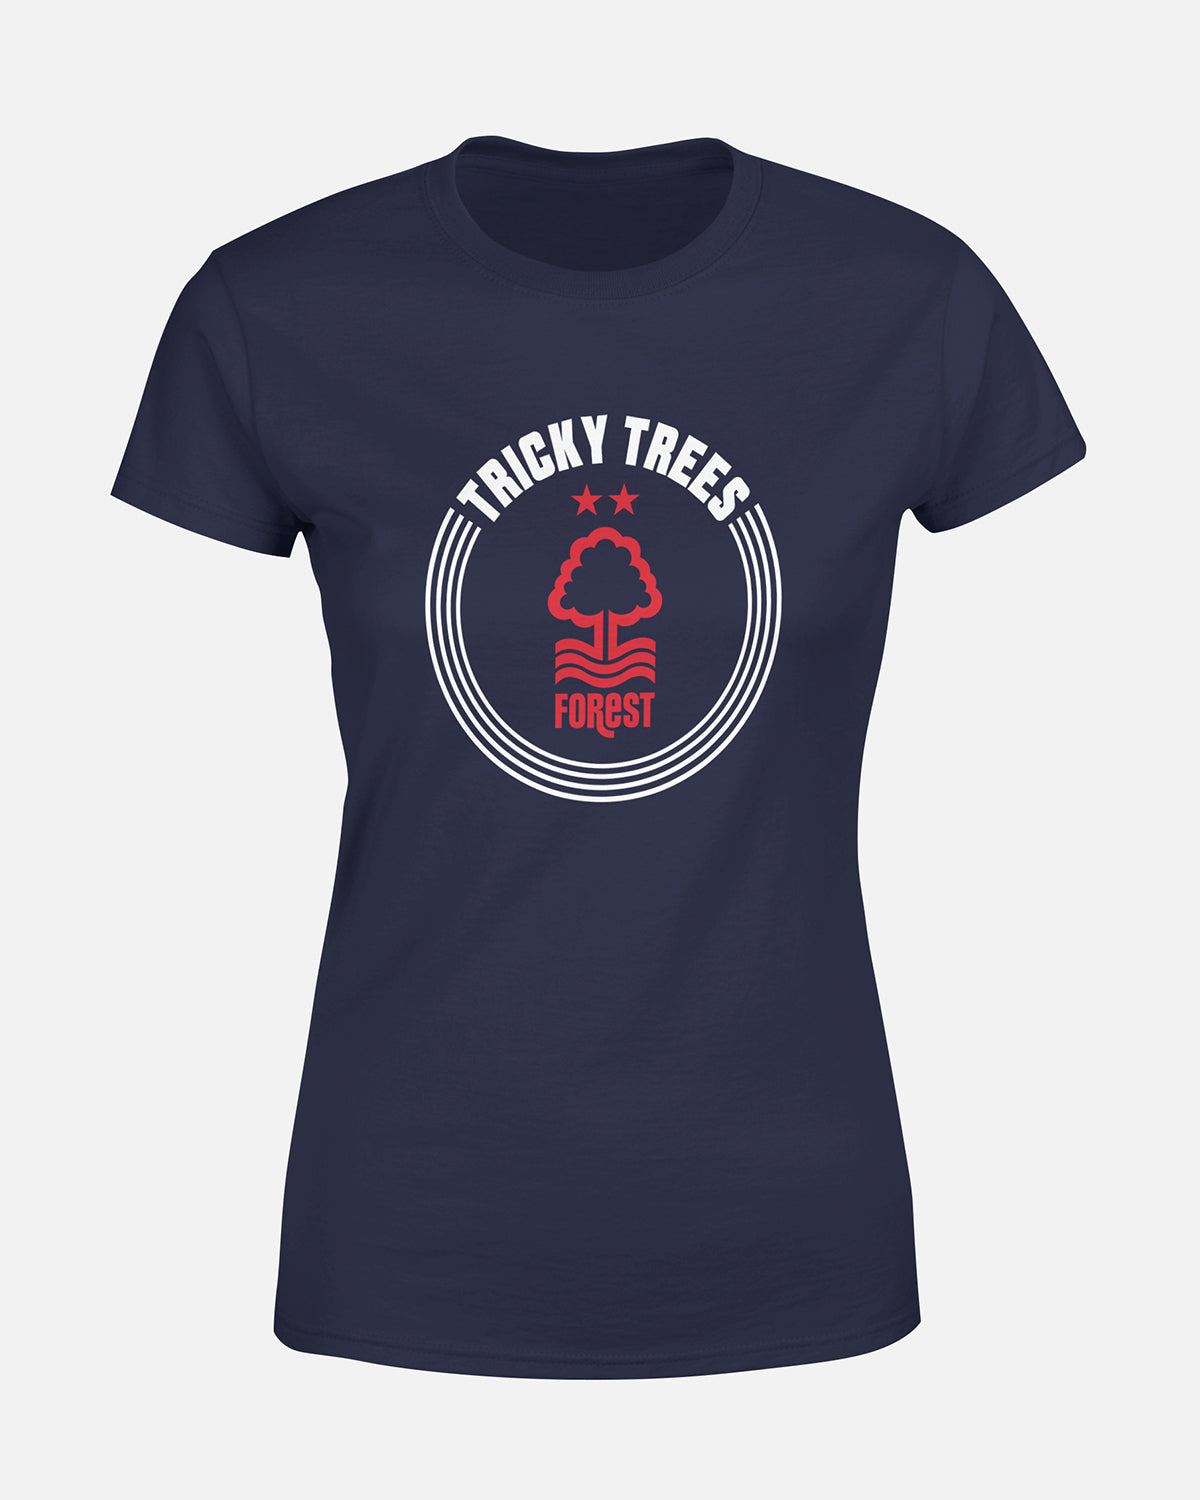 NFFC Women's Navy Tricky Trees Circle Tee